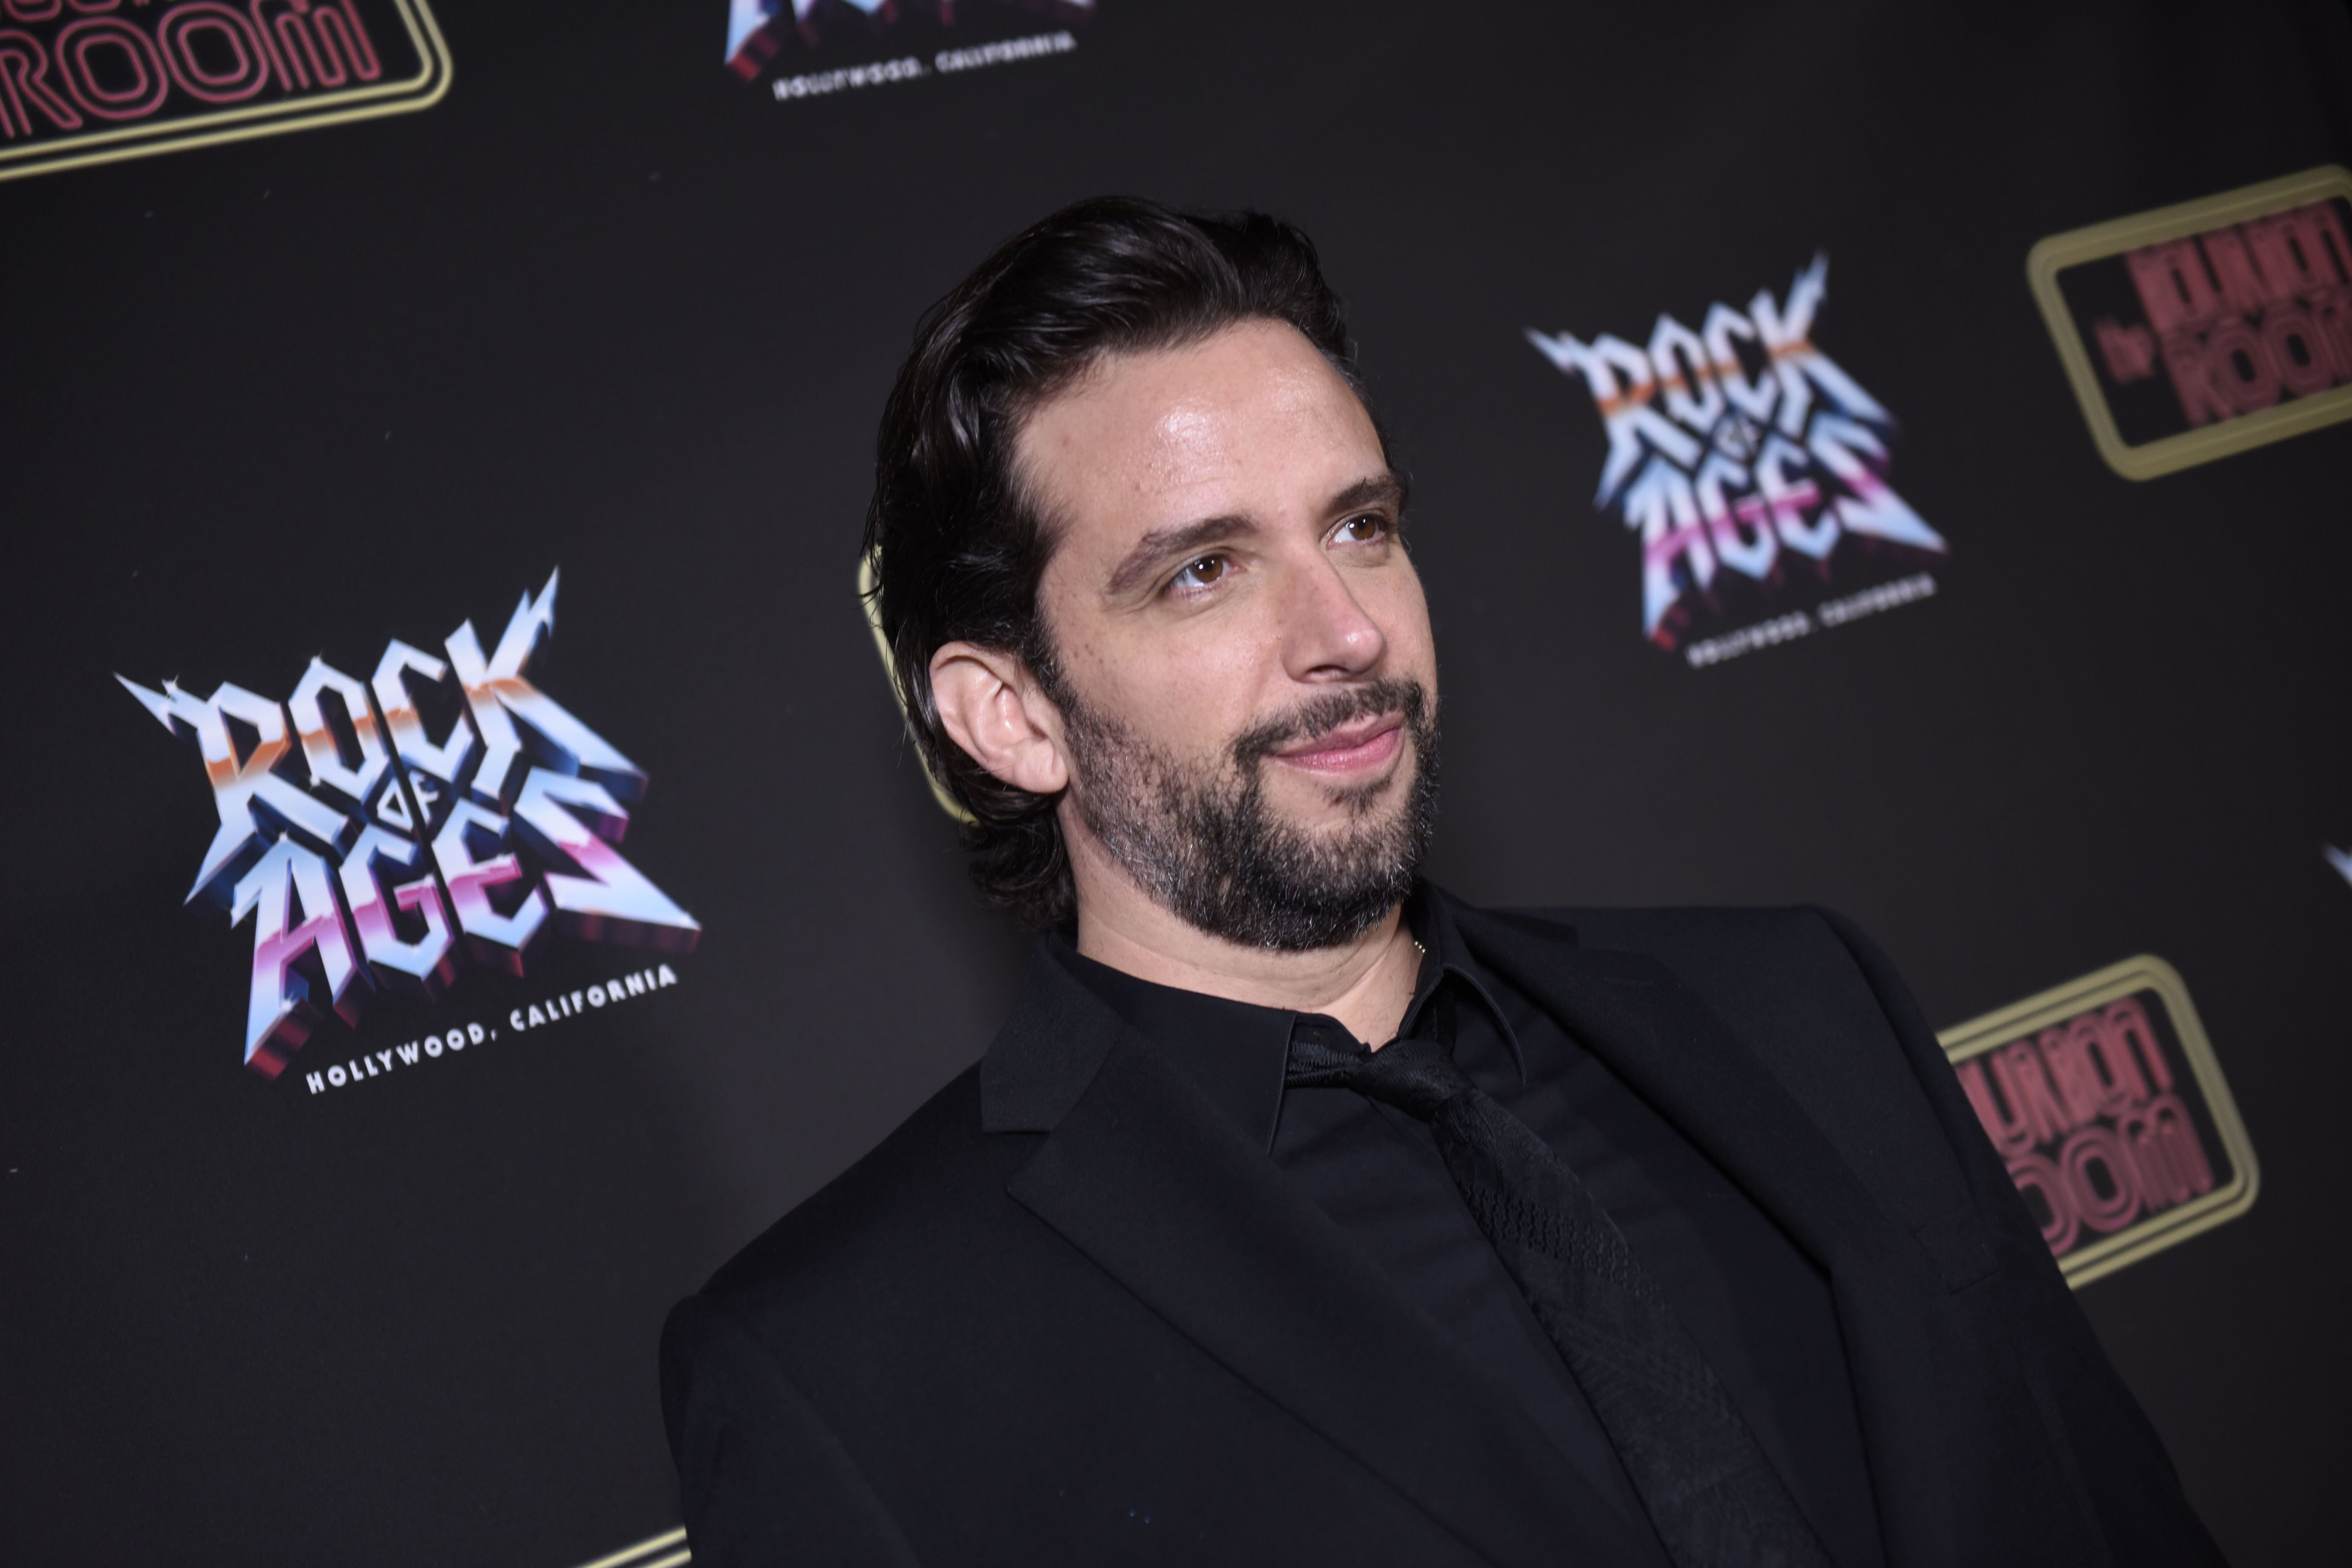 Nick Cordero at the opening night of "Rock Of Ages" at The Bourbon Room on January 15, 2020, in Hollywood, California | Photo: Vivien Killilea/Getty Images